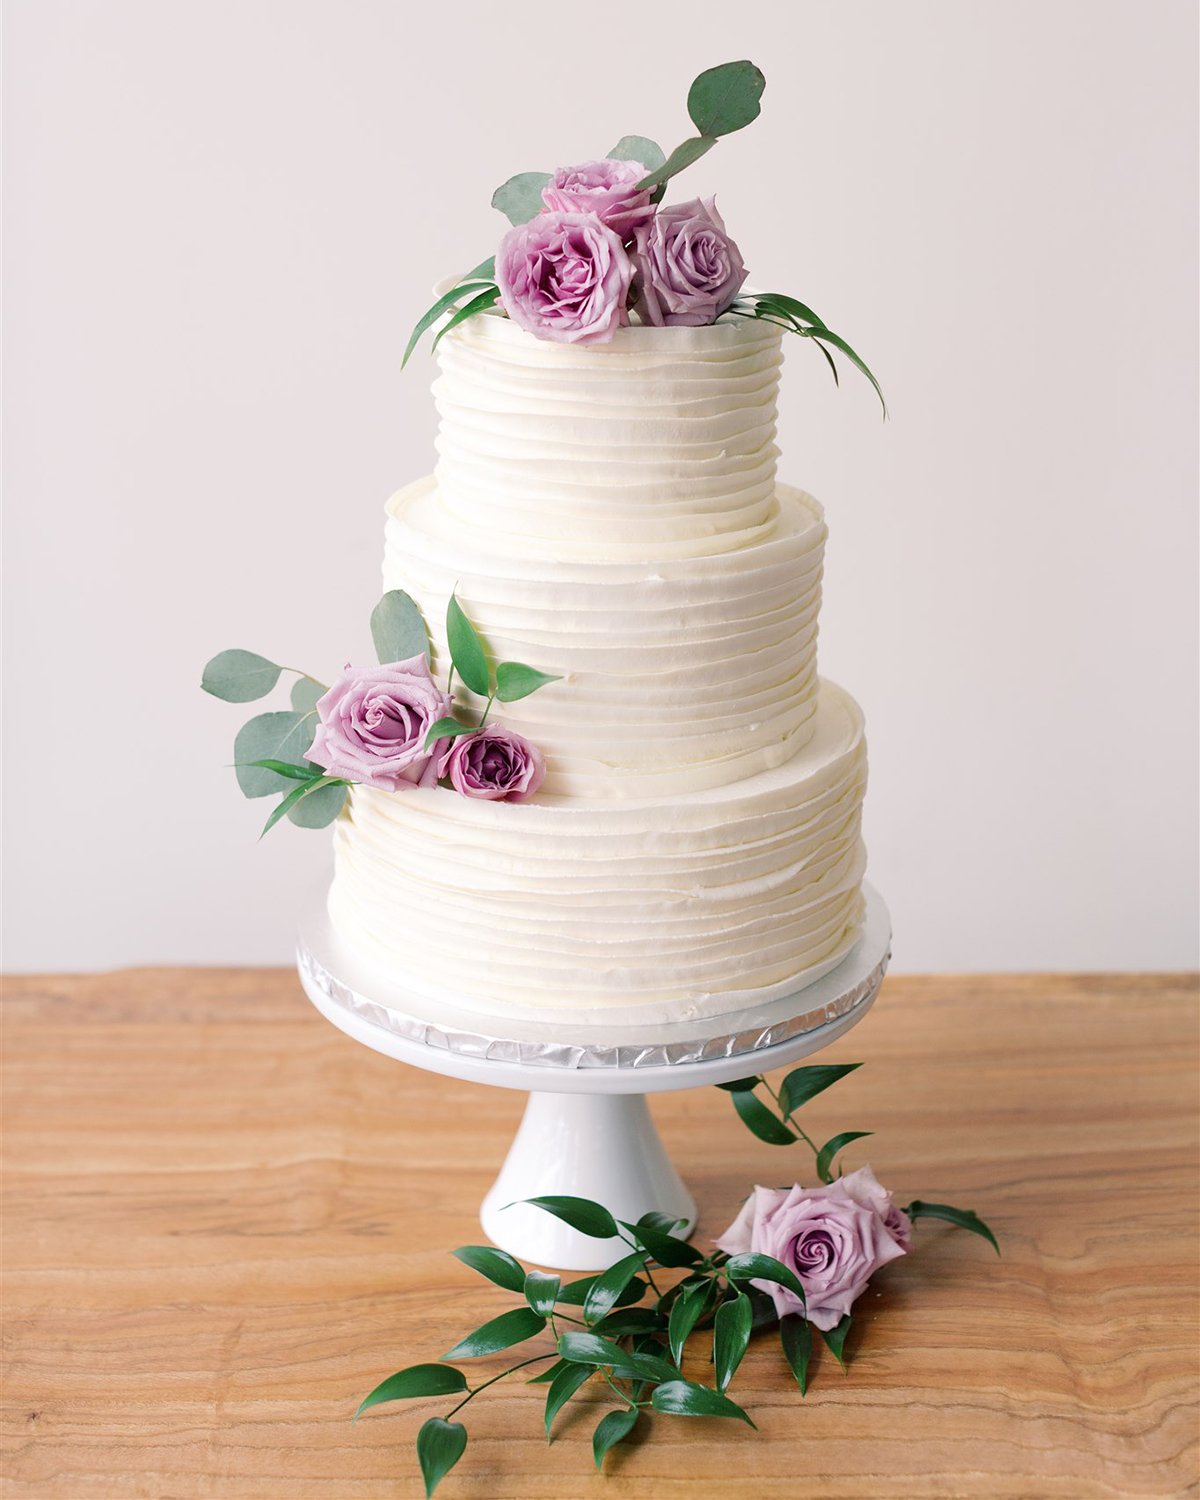 🌸 🍰 Sweet! 🍰 🌸

Your flower besties can even help you with cake flowers! To dress up your cake, it's as simple as clicking &quot;add to cart.&quot;

We've thought of everything for wedding flower packages down to the littlest detail.
We got you b